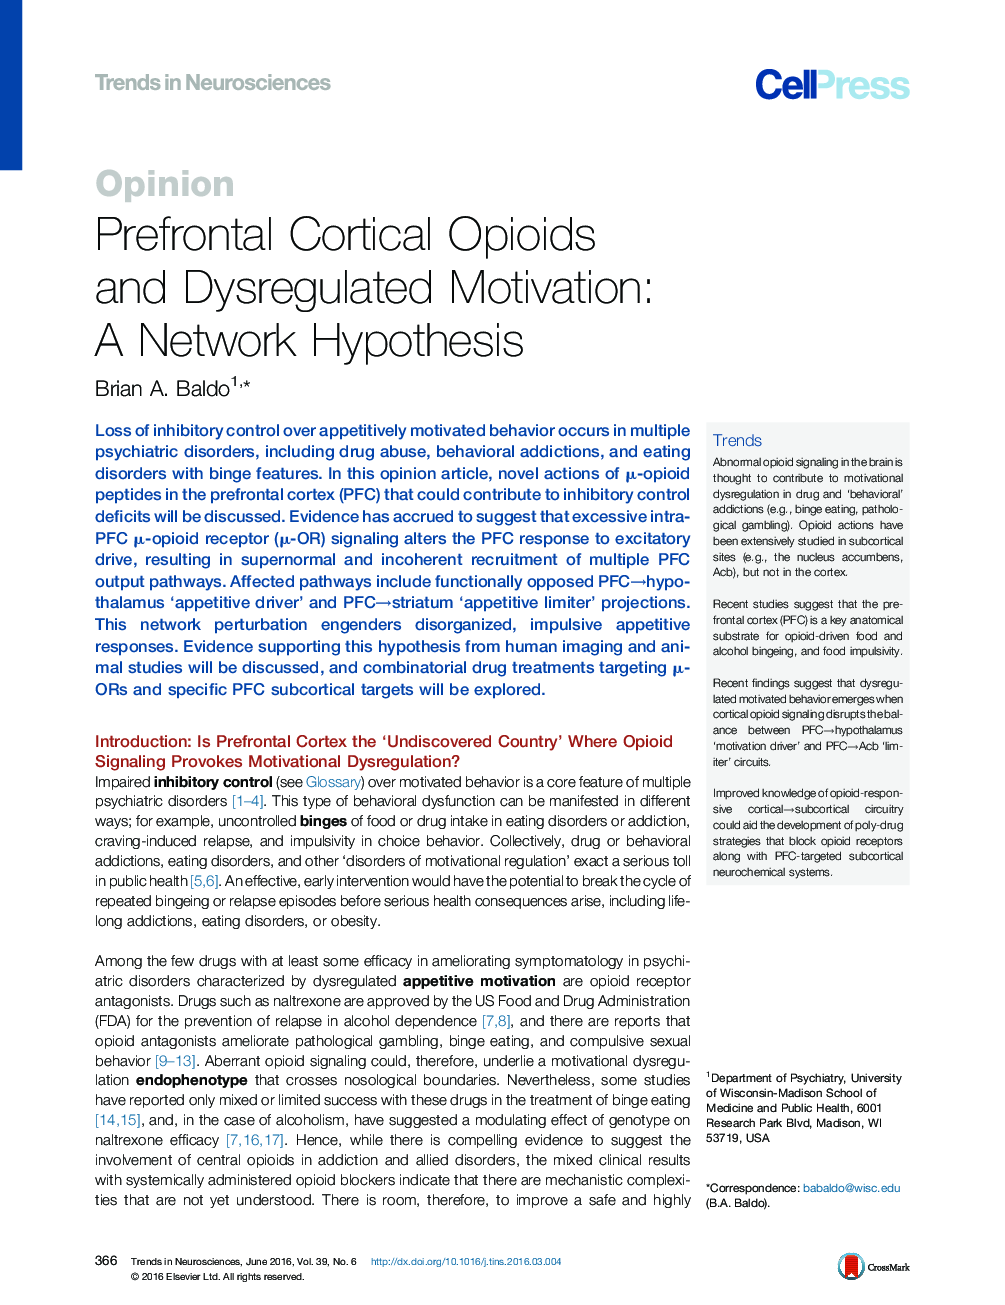 Prefrontal Cortical Opioids and Dysregulated Motivation: A Network Hypothesis